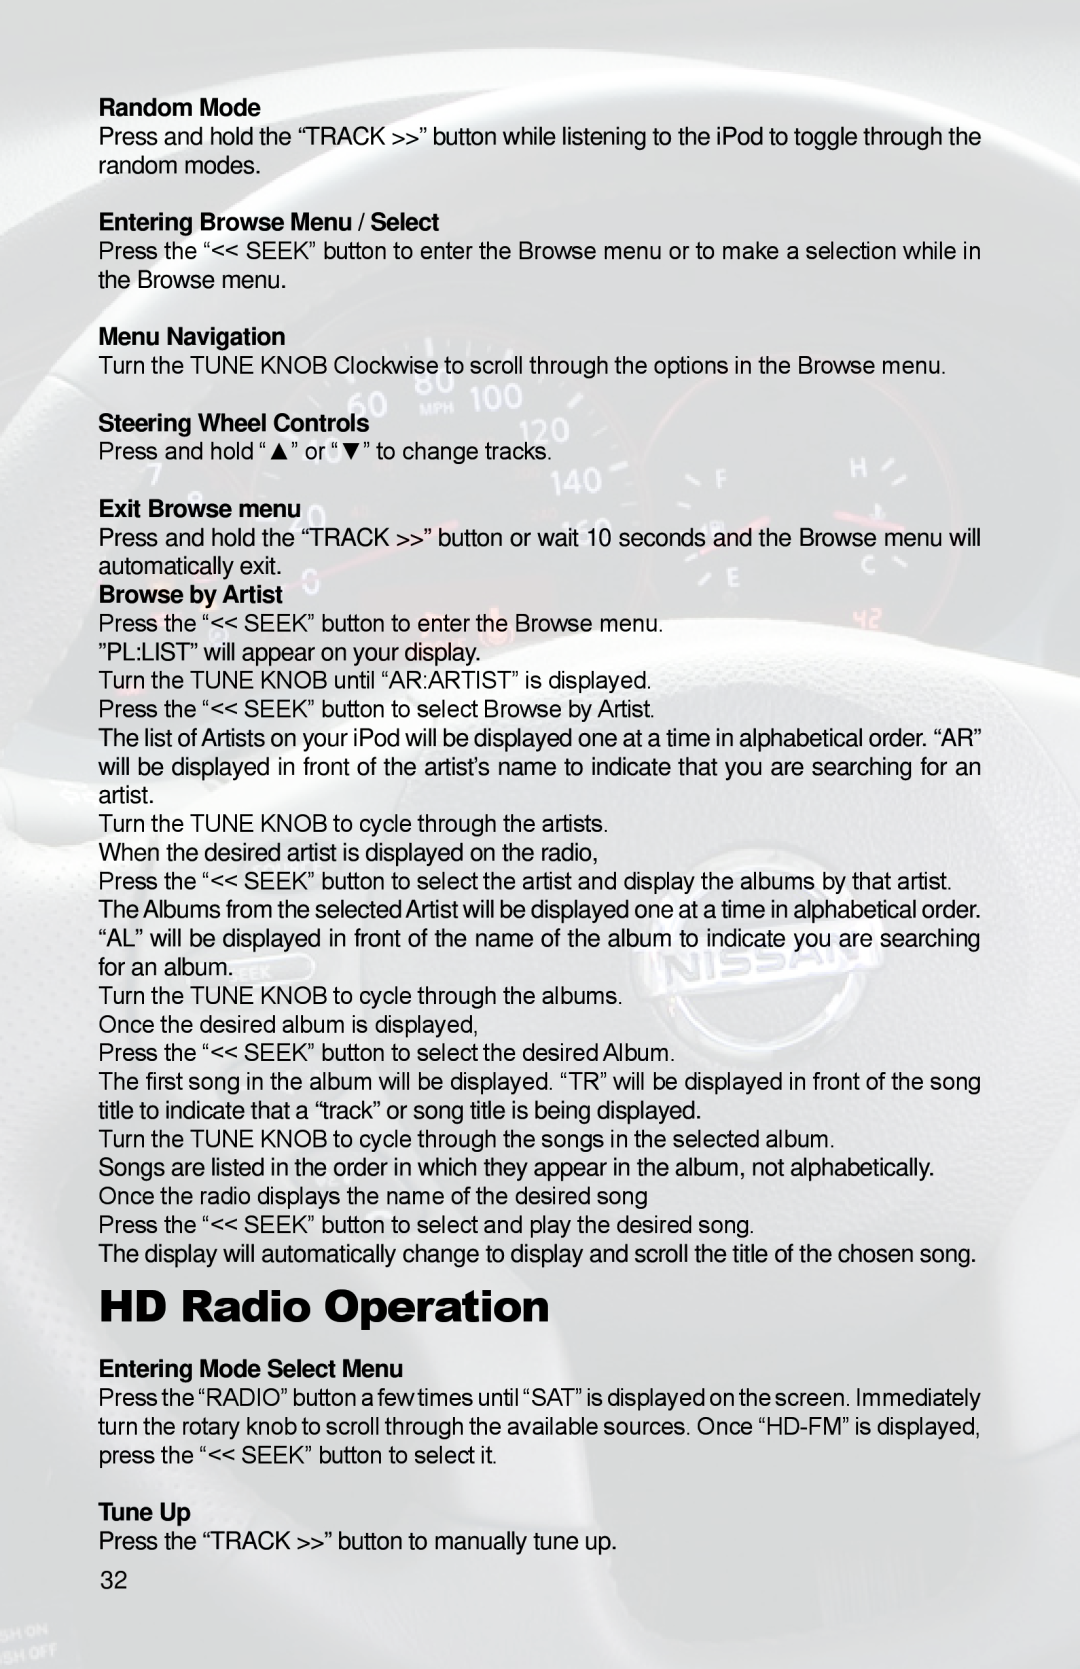 iSimple PGHNI2 owner manual HD Radio Operation, Press and hold “” or “” to change tracks 